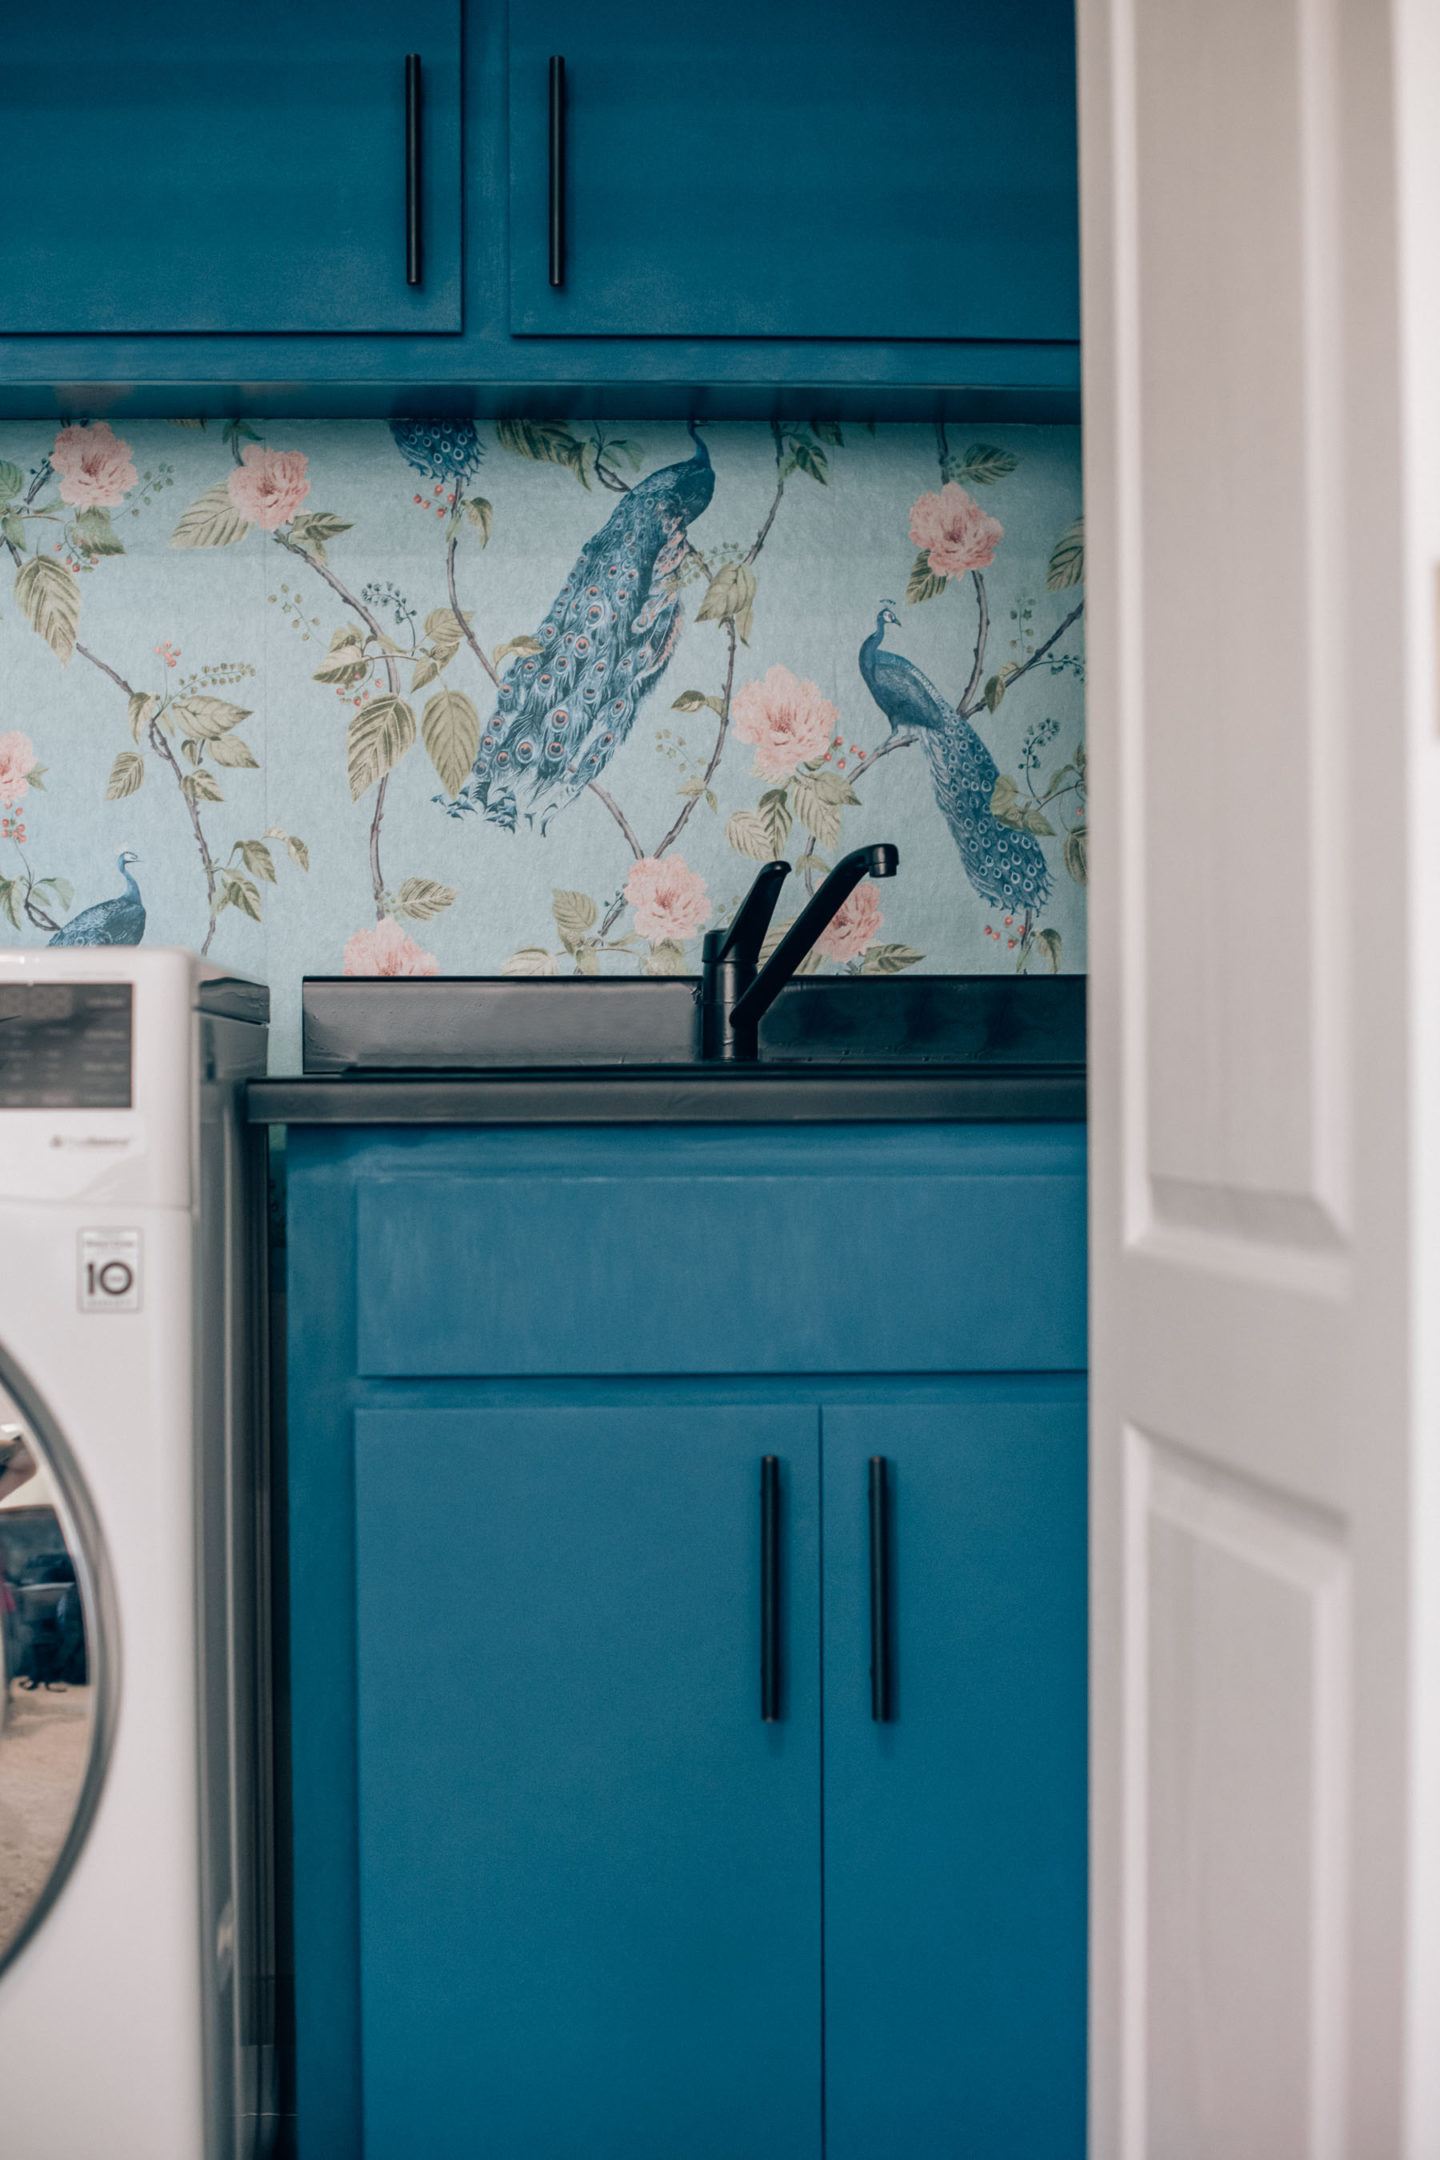 laundry room wallpaper  An artists blog about art wallpaper decor  especially how to design around oak wood margaritas and everything  youve ever wanted to read  COPPER CORNERS